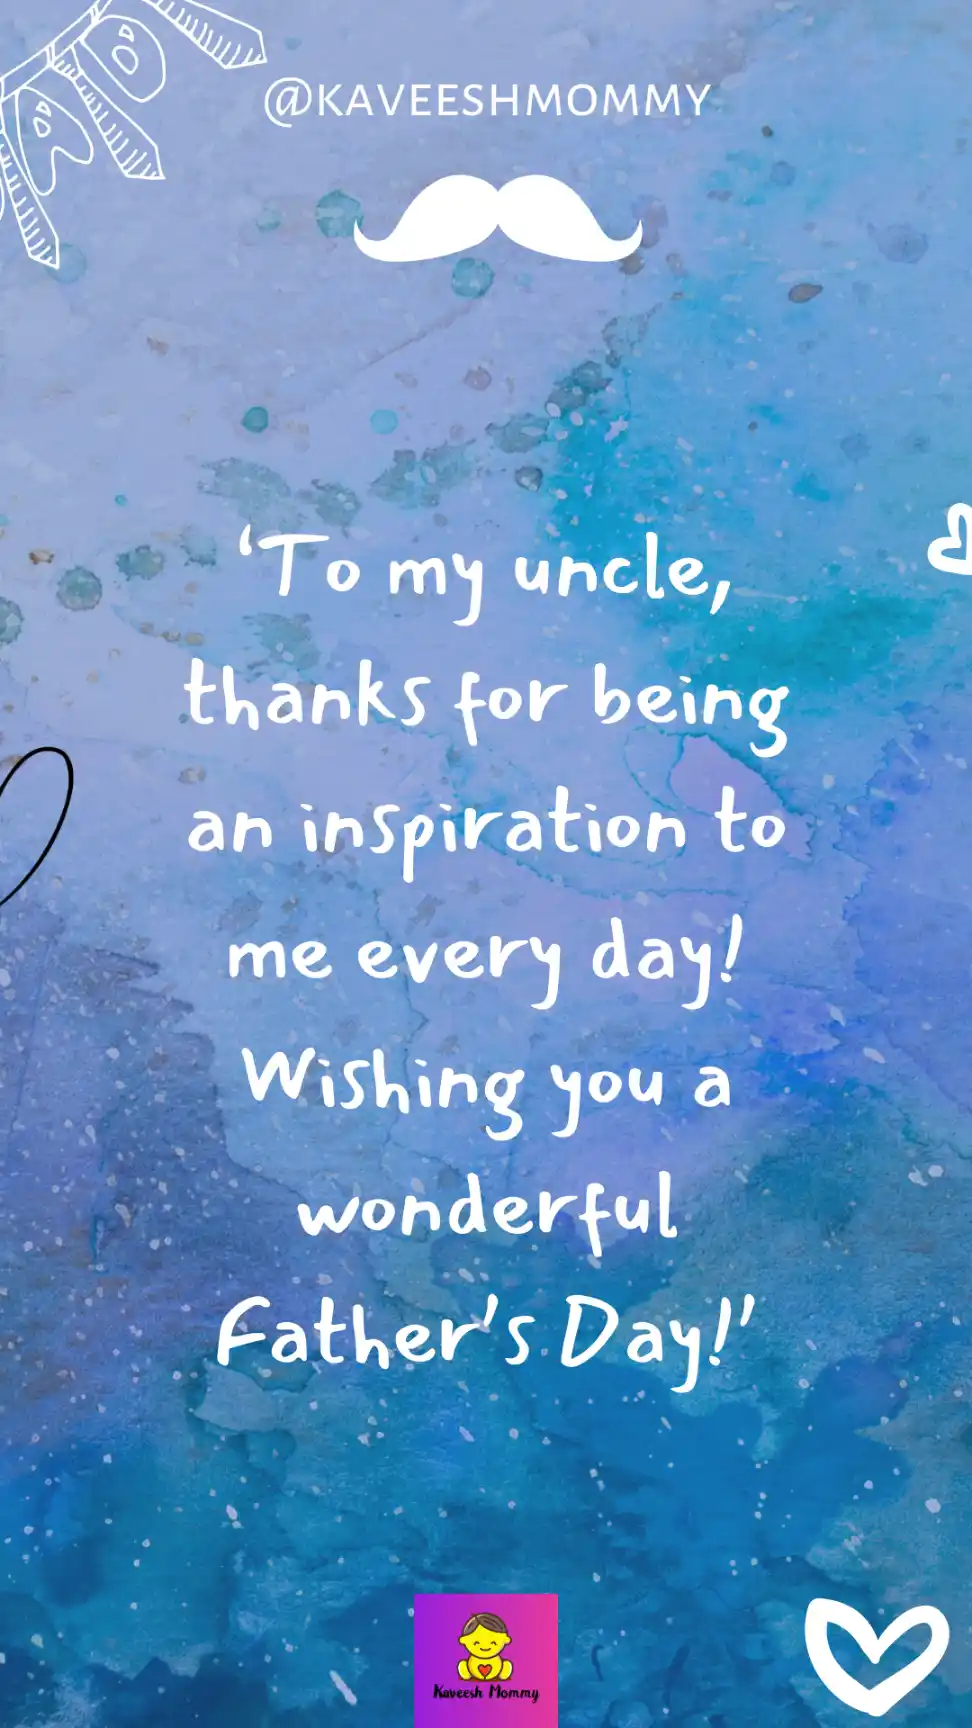 Father's Day Wishes for Uncle 